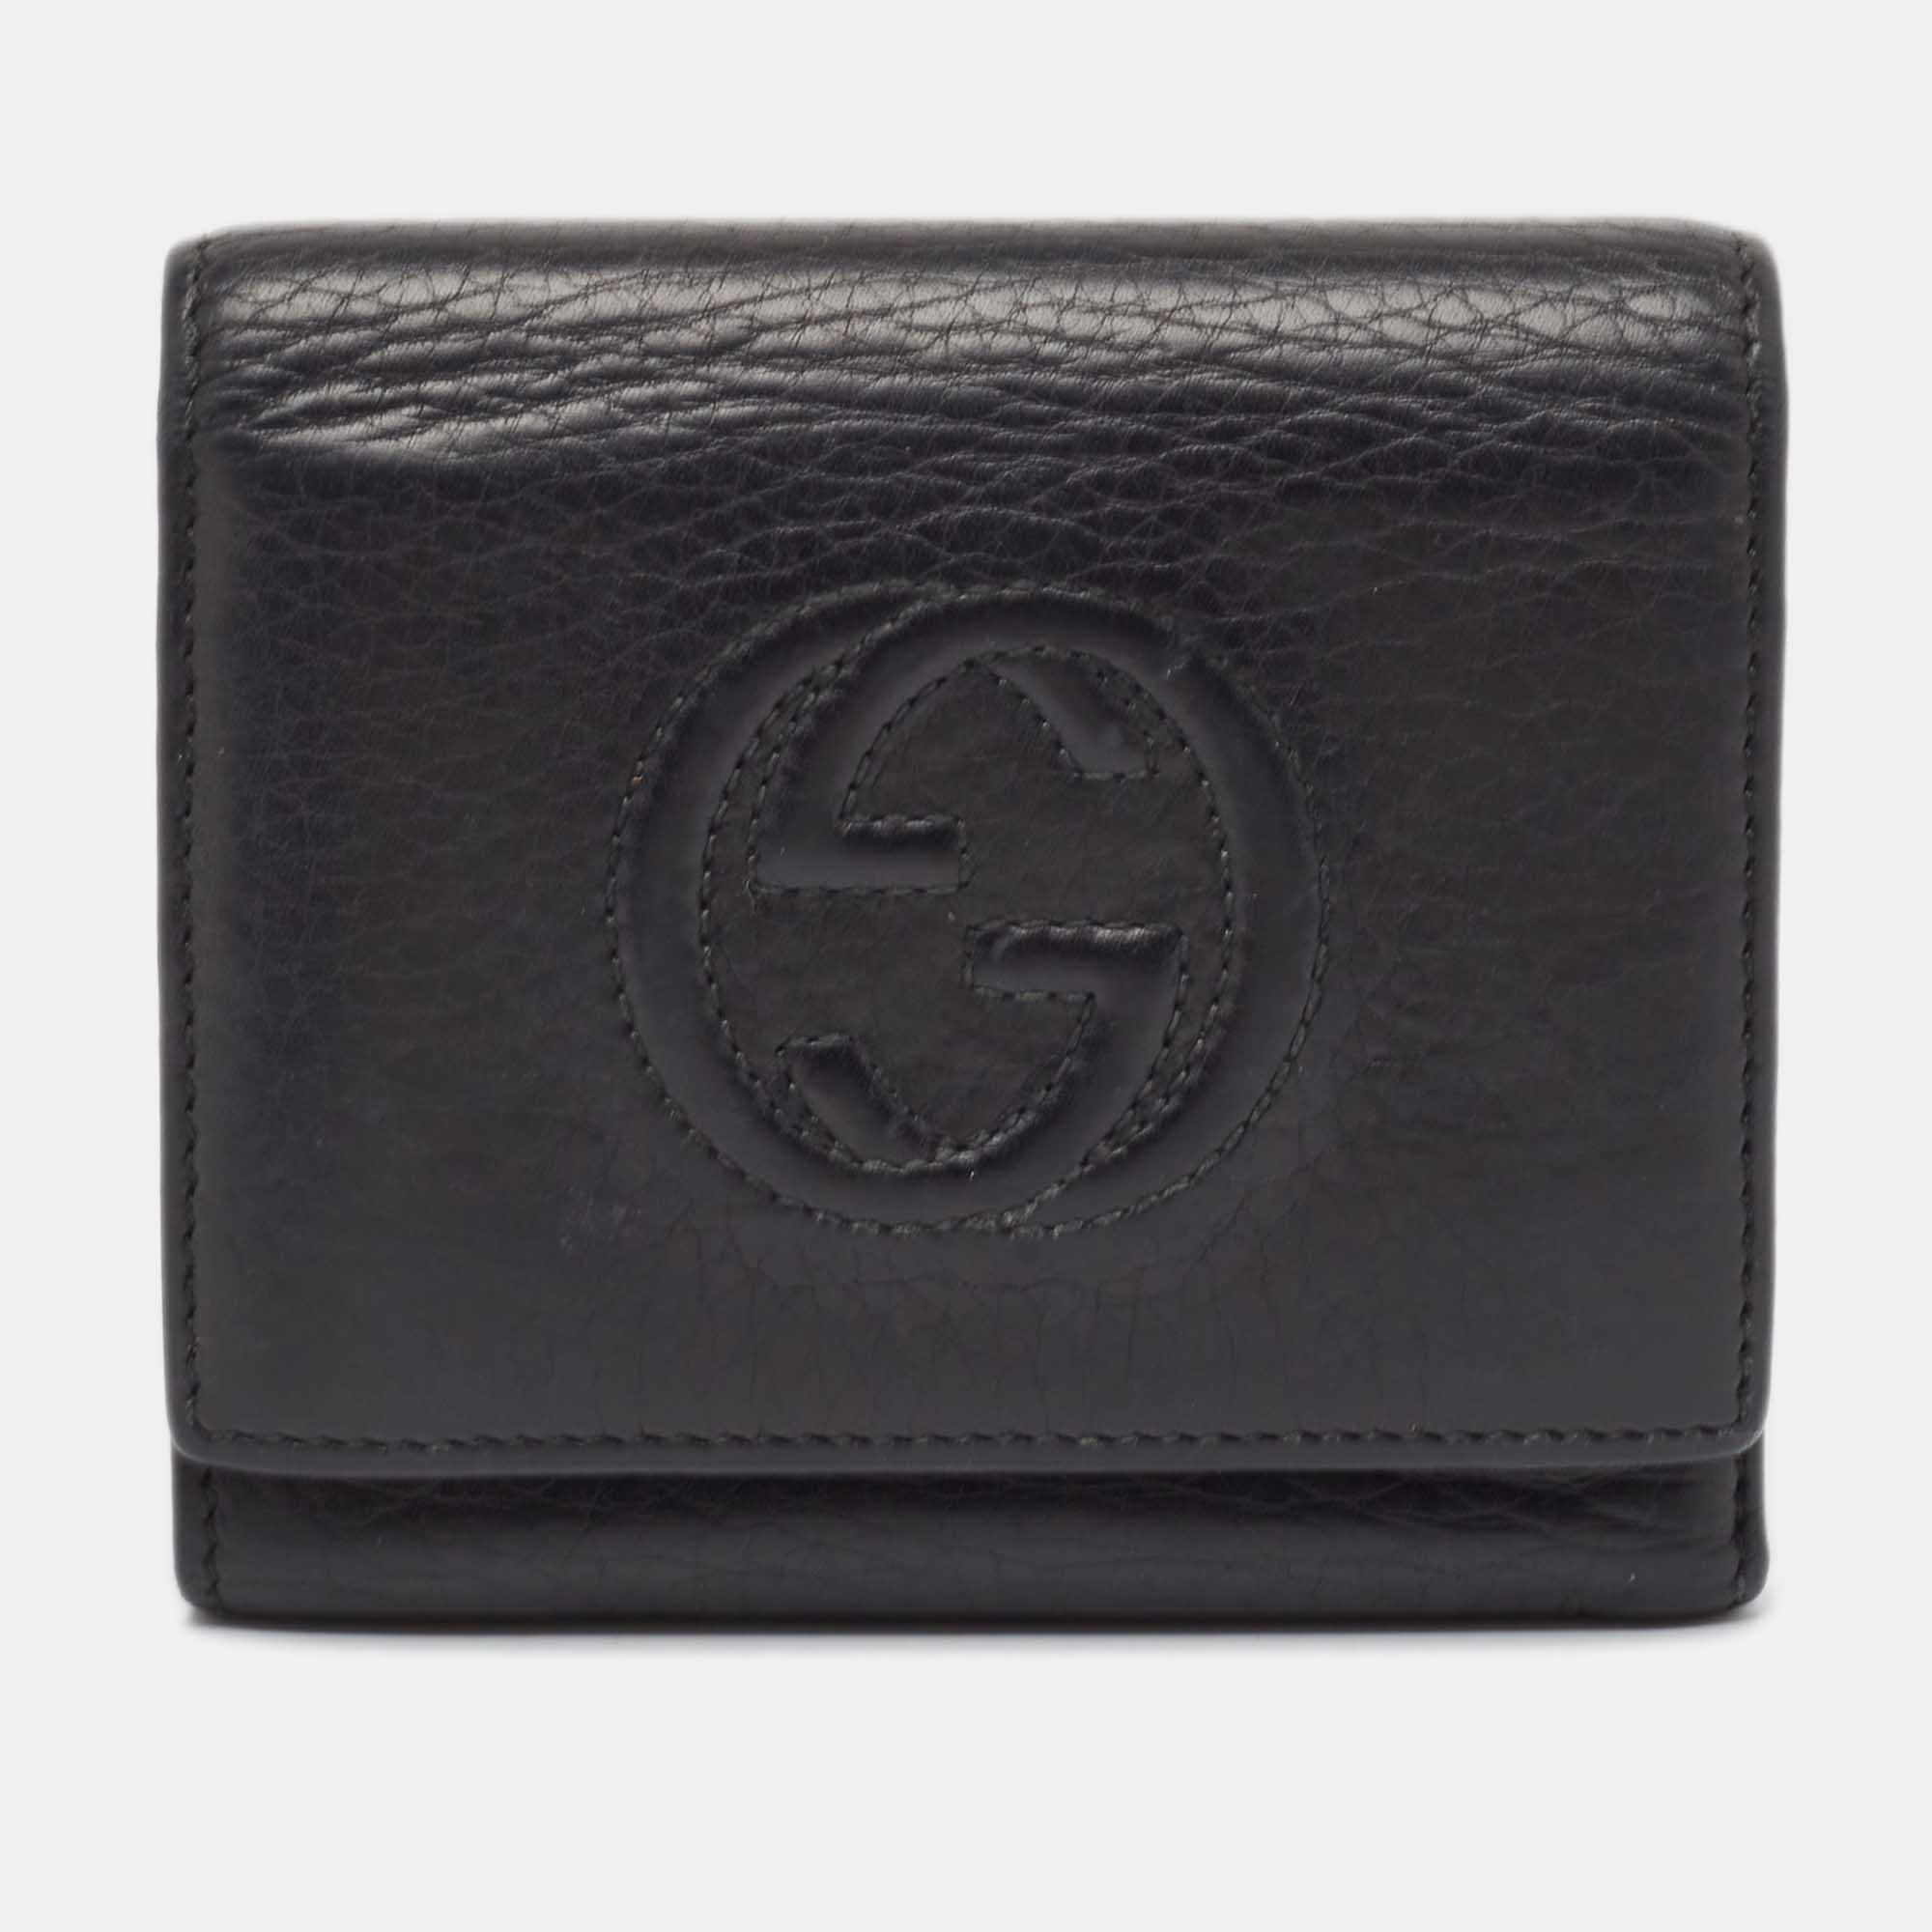 Pre-owned Gucci Black Leather Soho Trifold Wallet